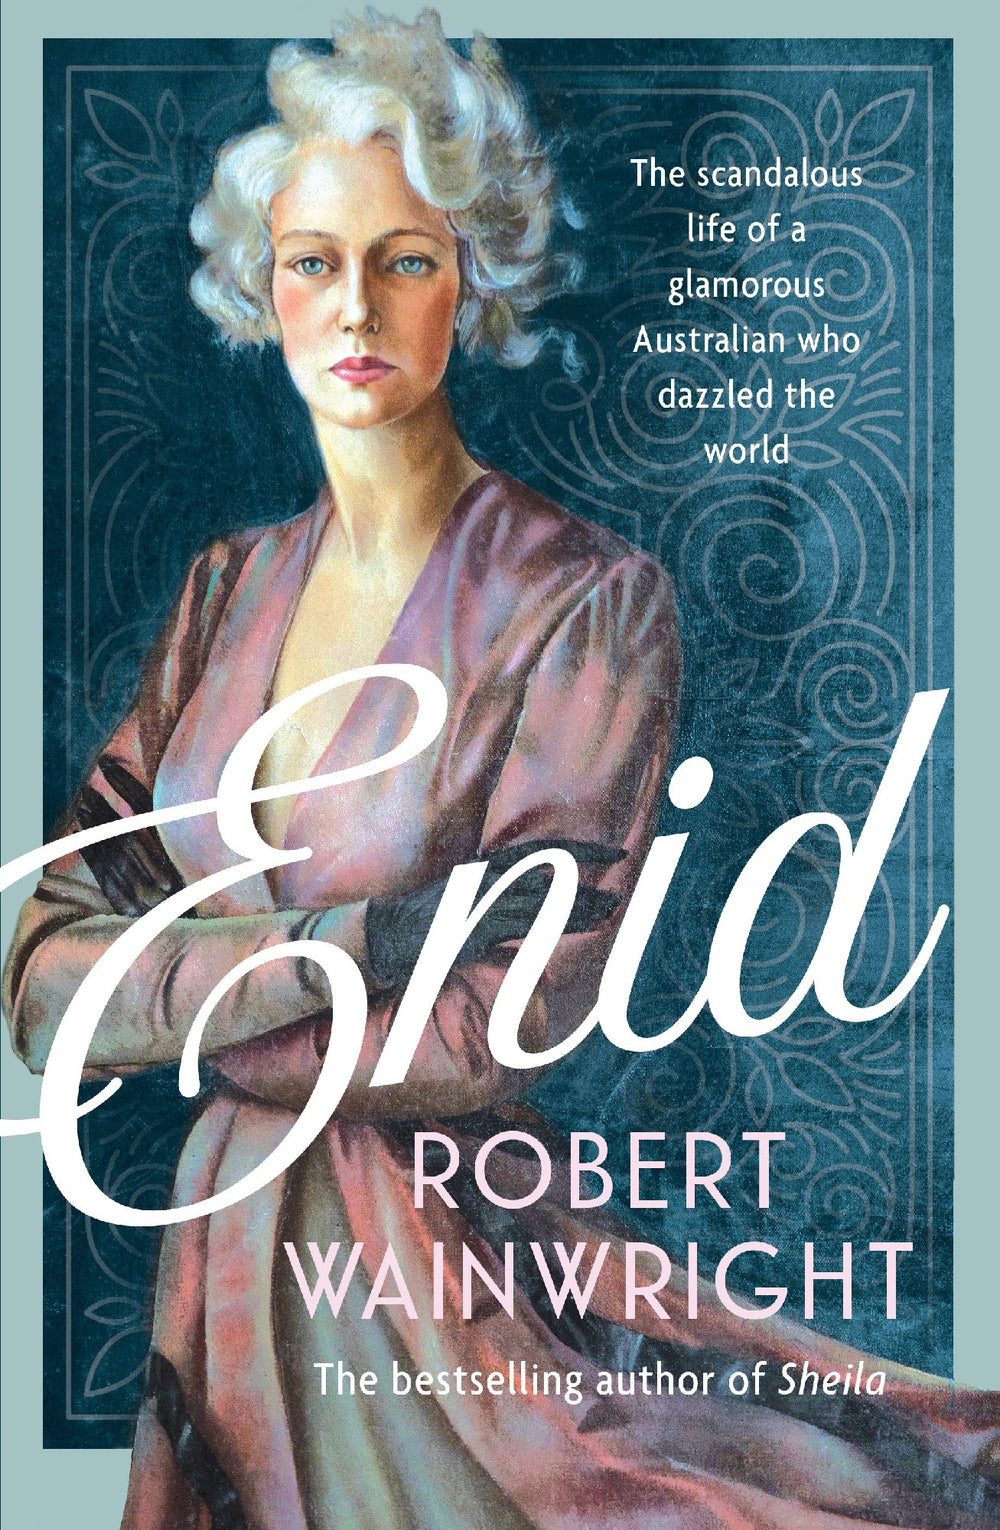 Enid: The Compelling Story of an Australian Socialite Who Fascinated the World